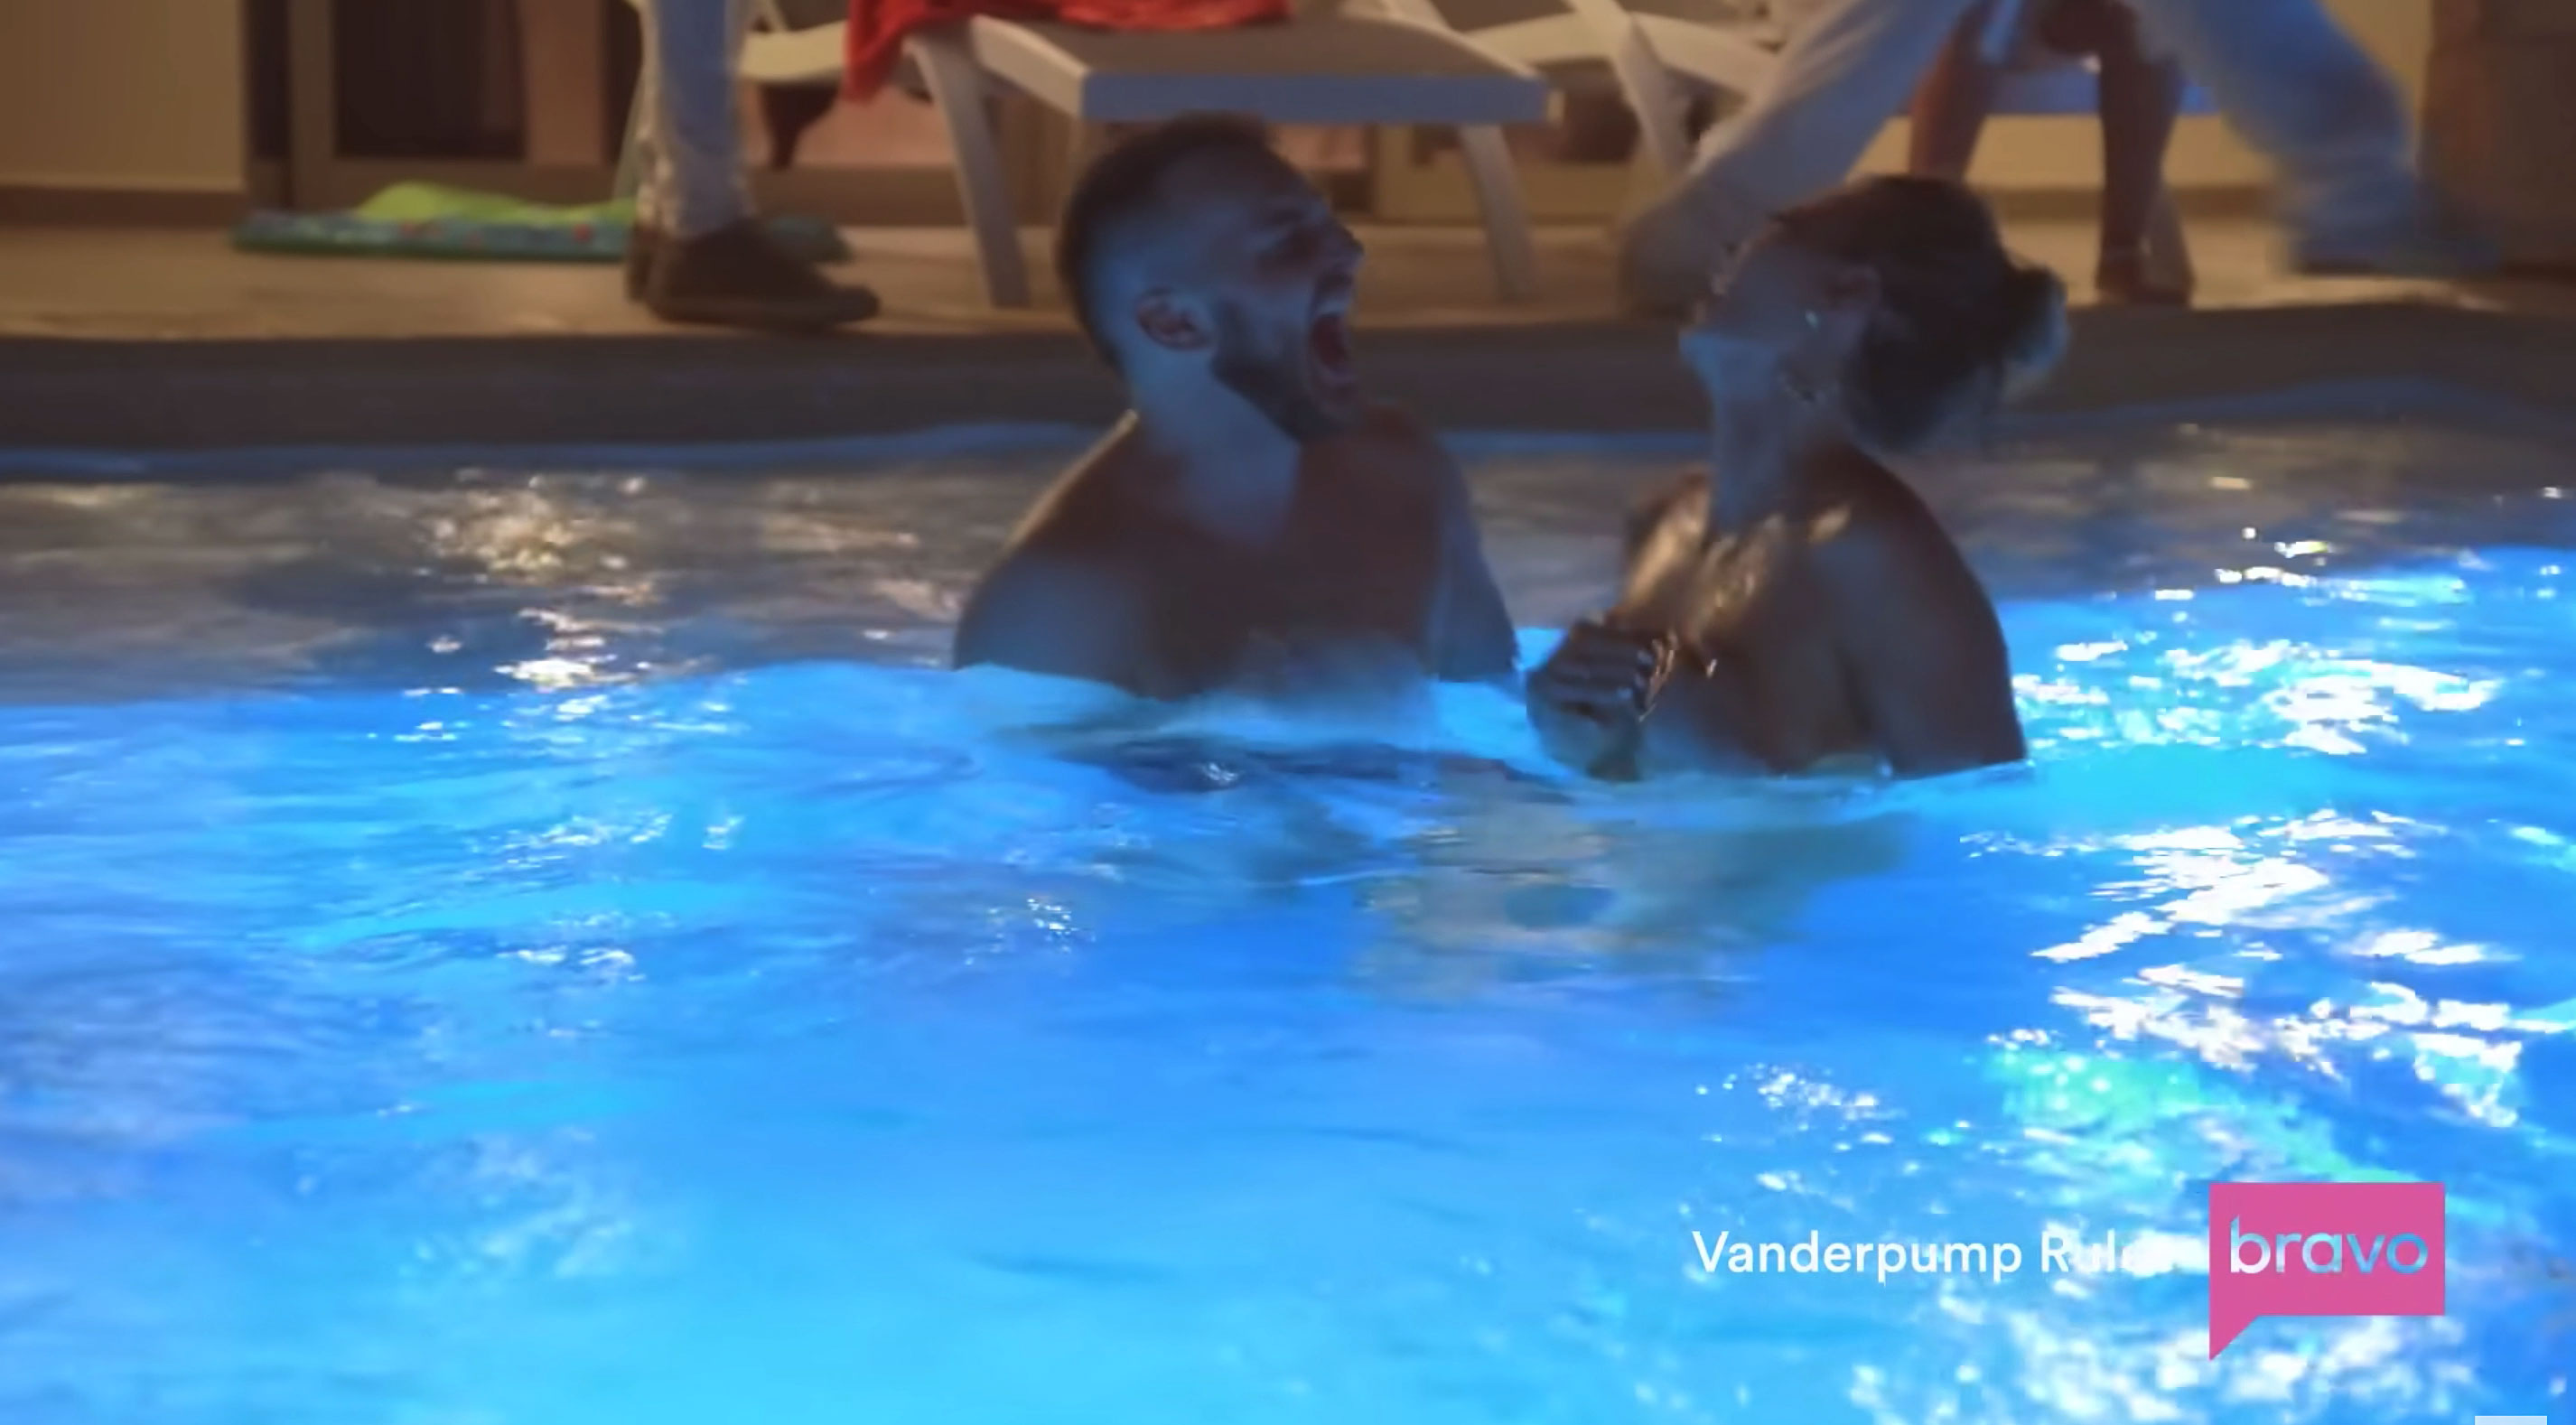 Man Skinny-Dipping in the Pool With Ariana Madix in Trailer Revealed